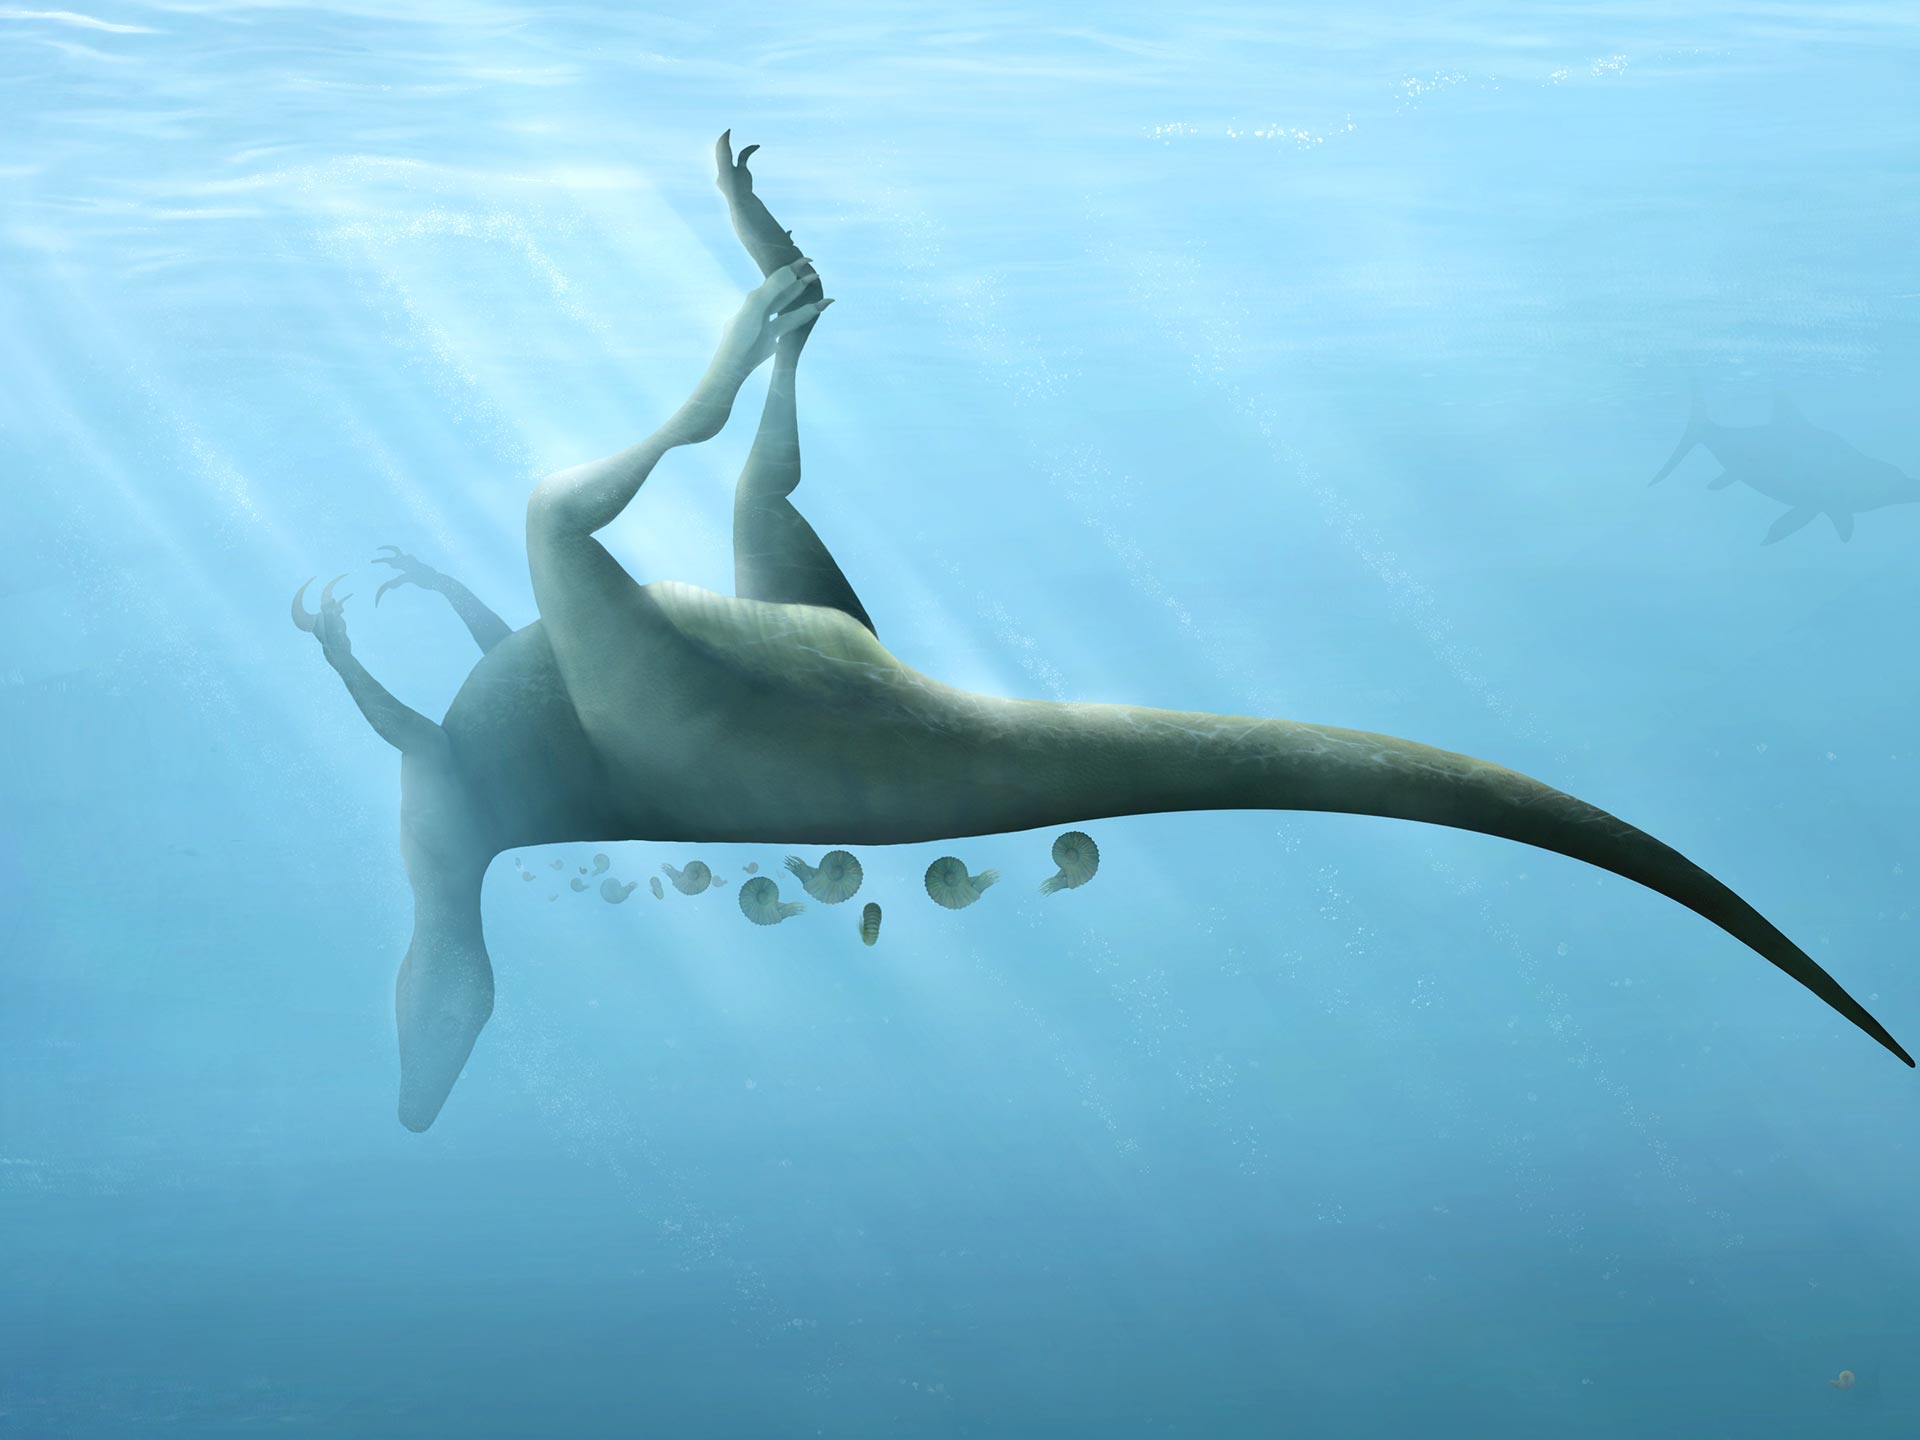 Unusual new species of dinosaurs discovered “We were shocked by just